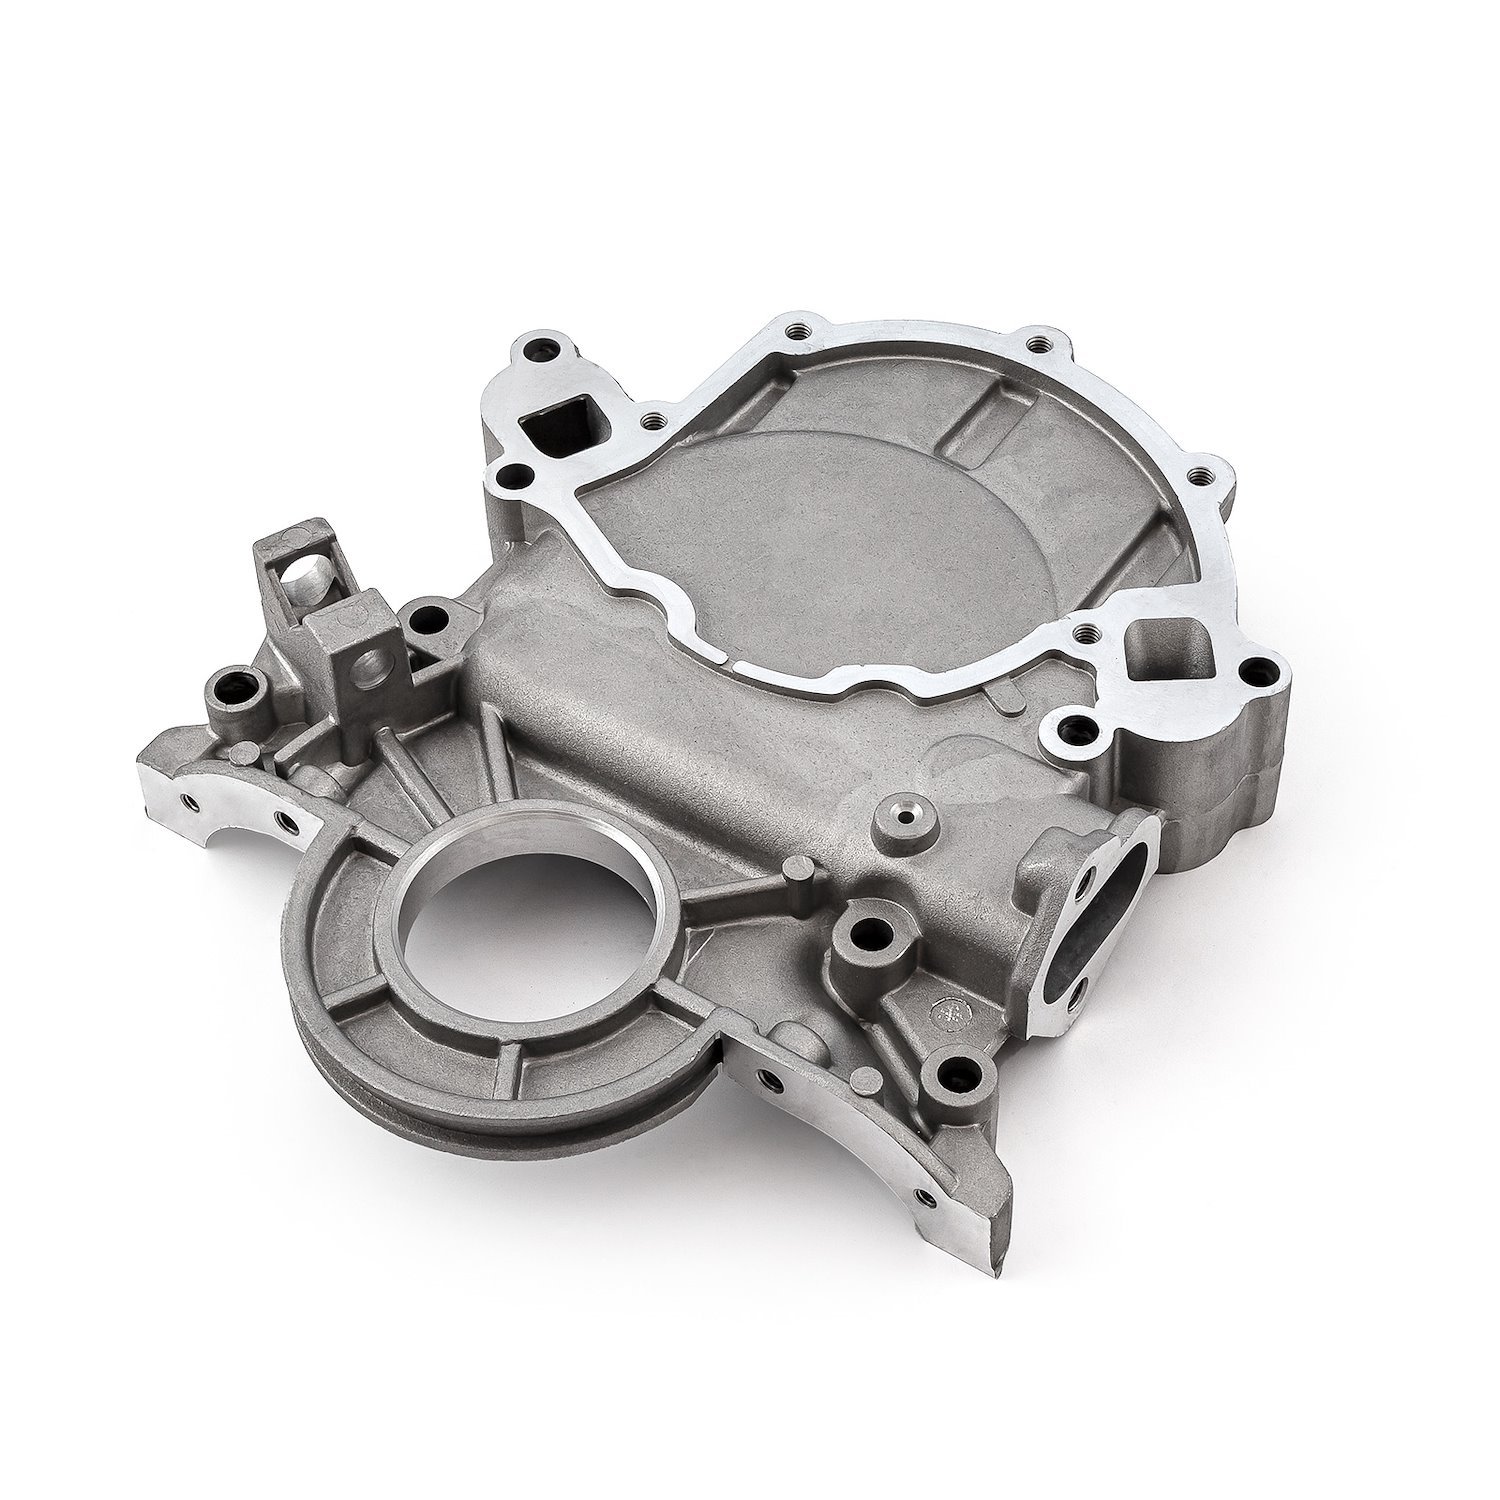 Natural Aluminum 1-Piece Timing Chain Cover 1981-1999 Small Block Ford 289/302/351 Windsor 5.0L EFI